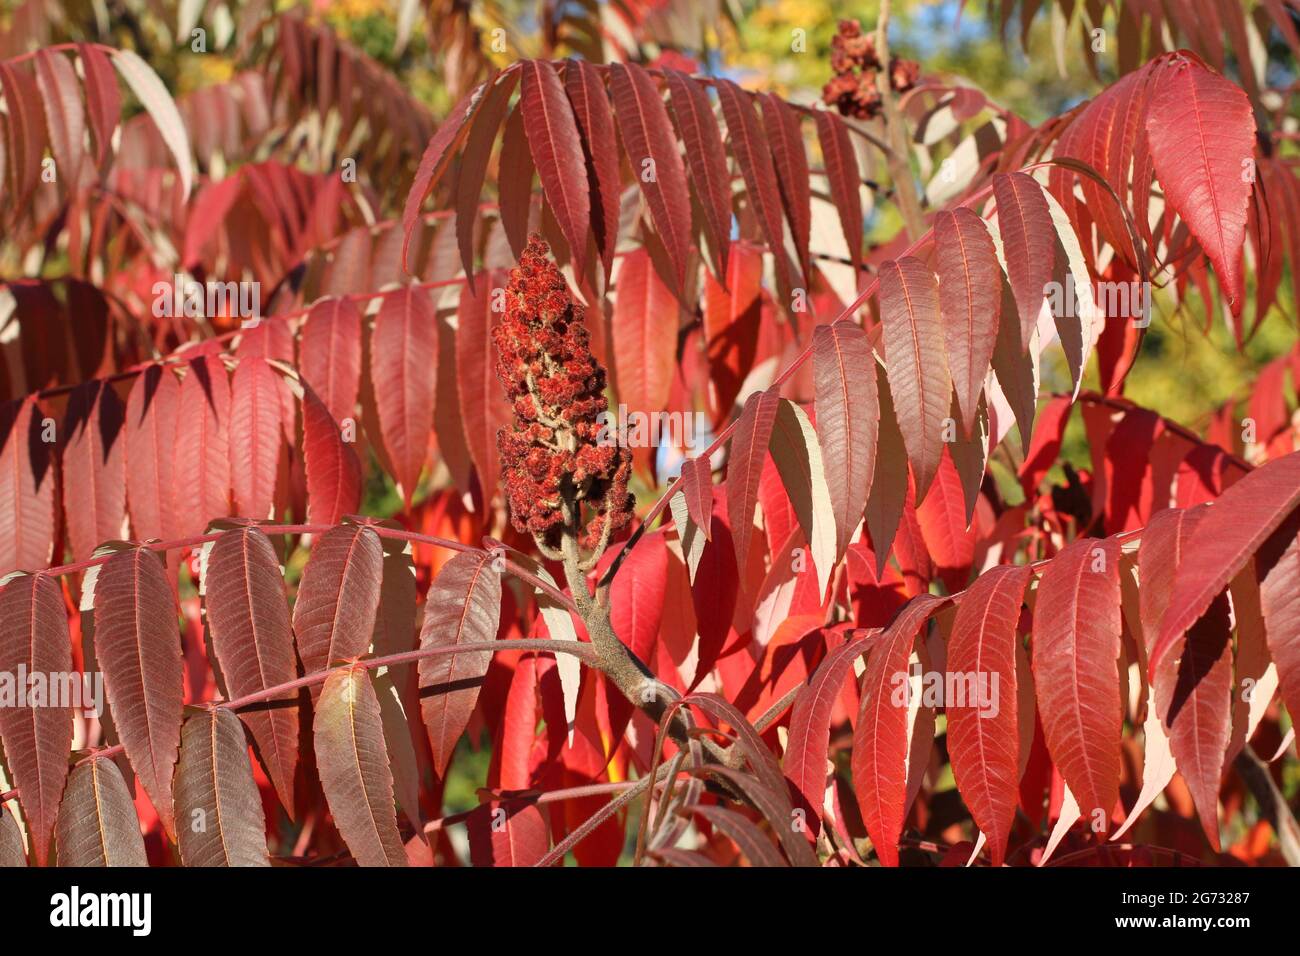 Autumn - purple and red leaves on sumac tree against green trees. Closeup Stock Photo